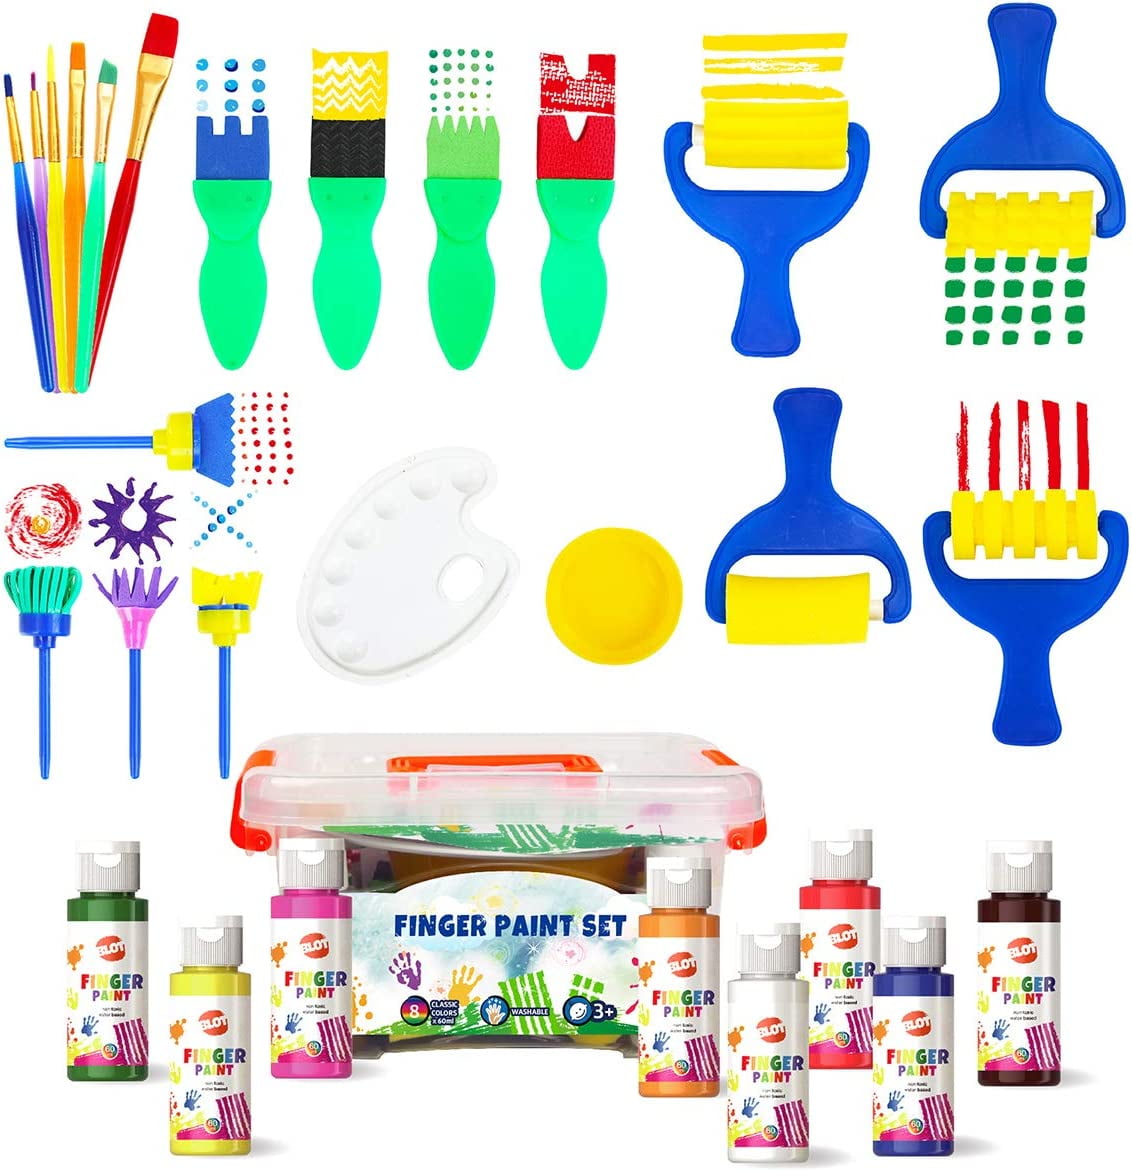  YGDZ Paint Sponges for Kids, 39pcs Early Learning